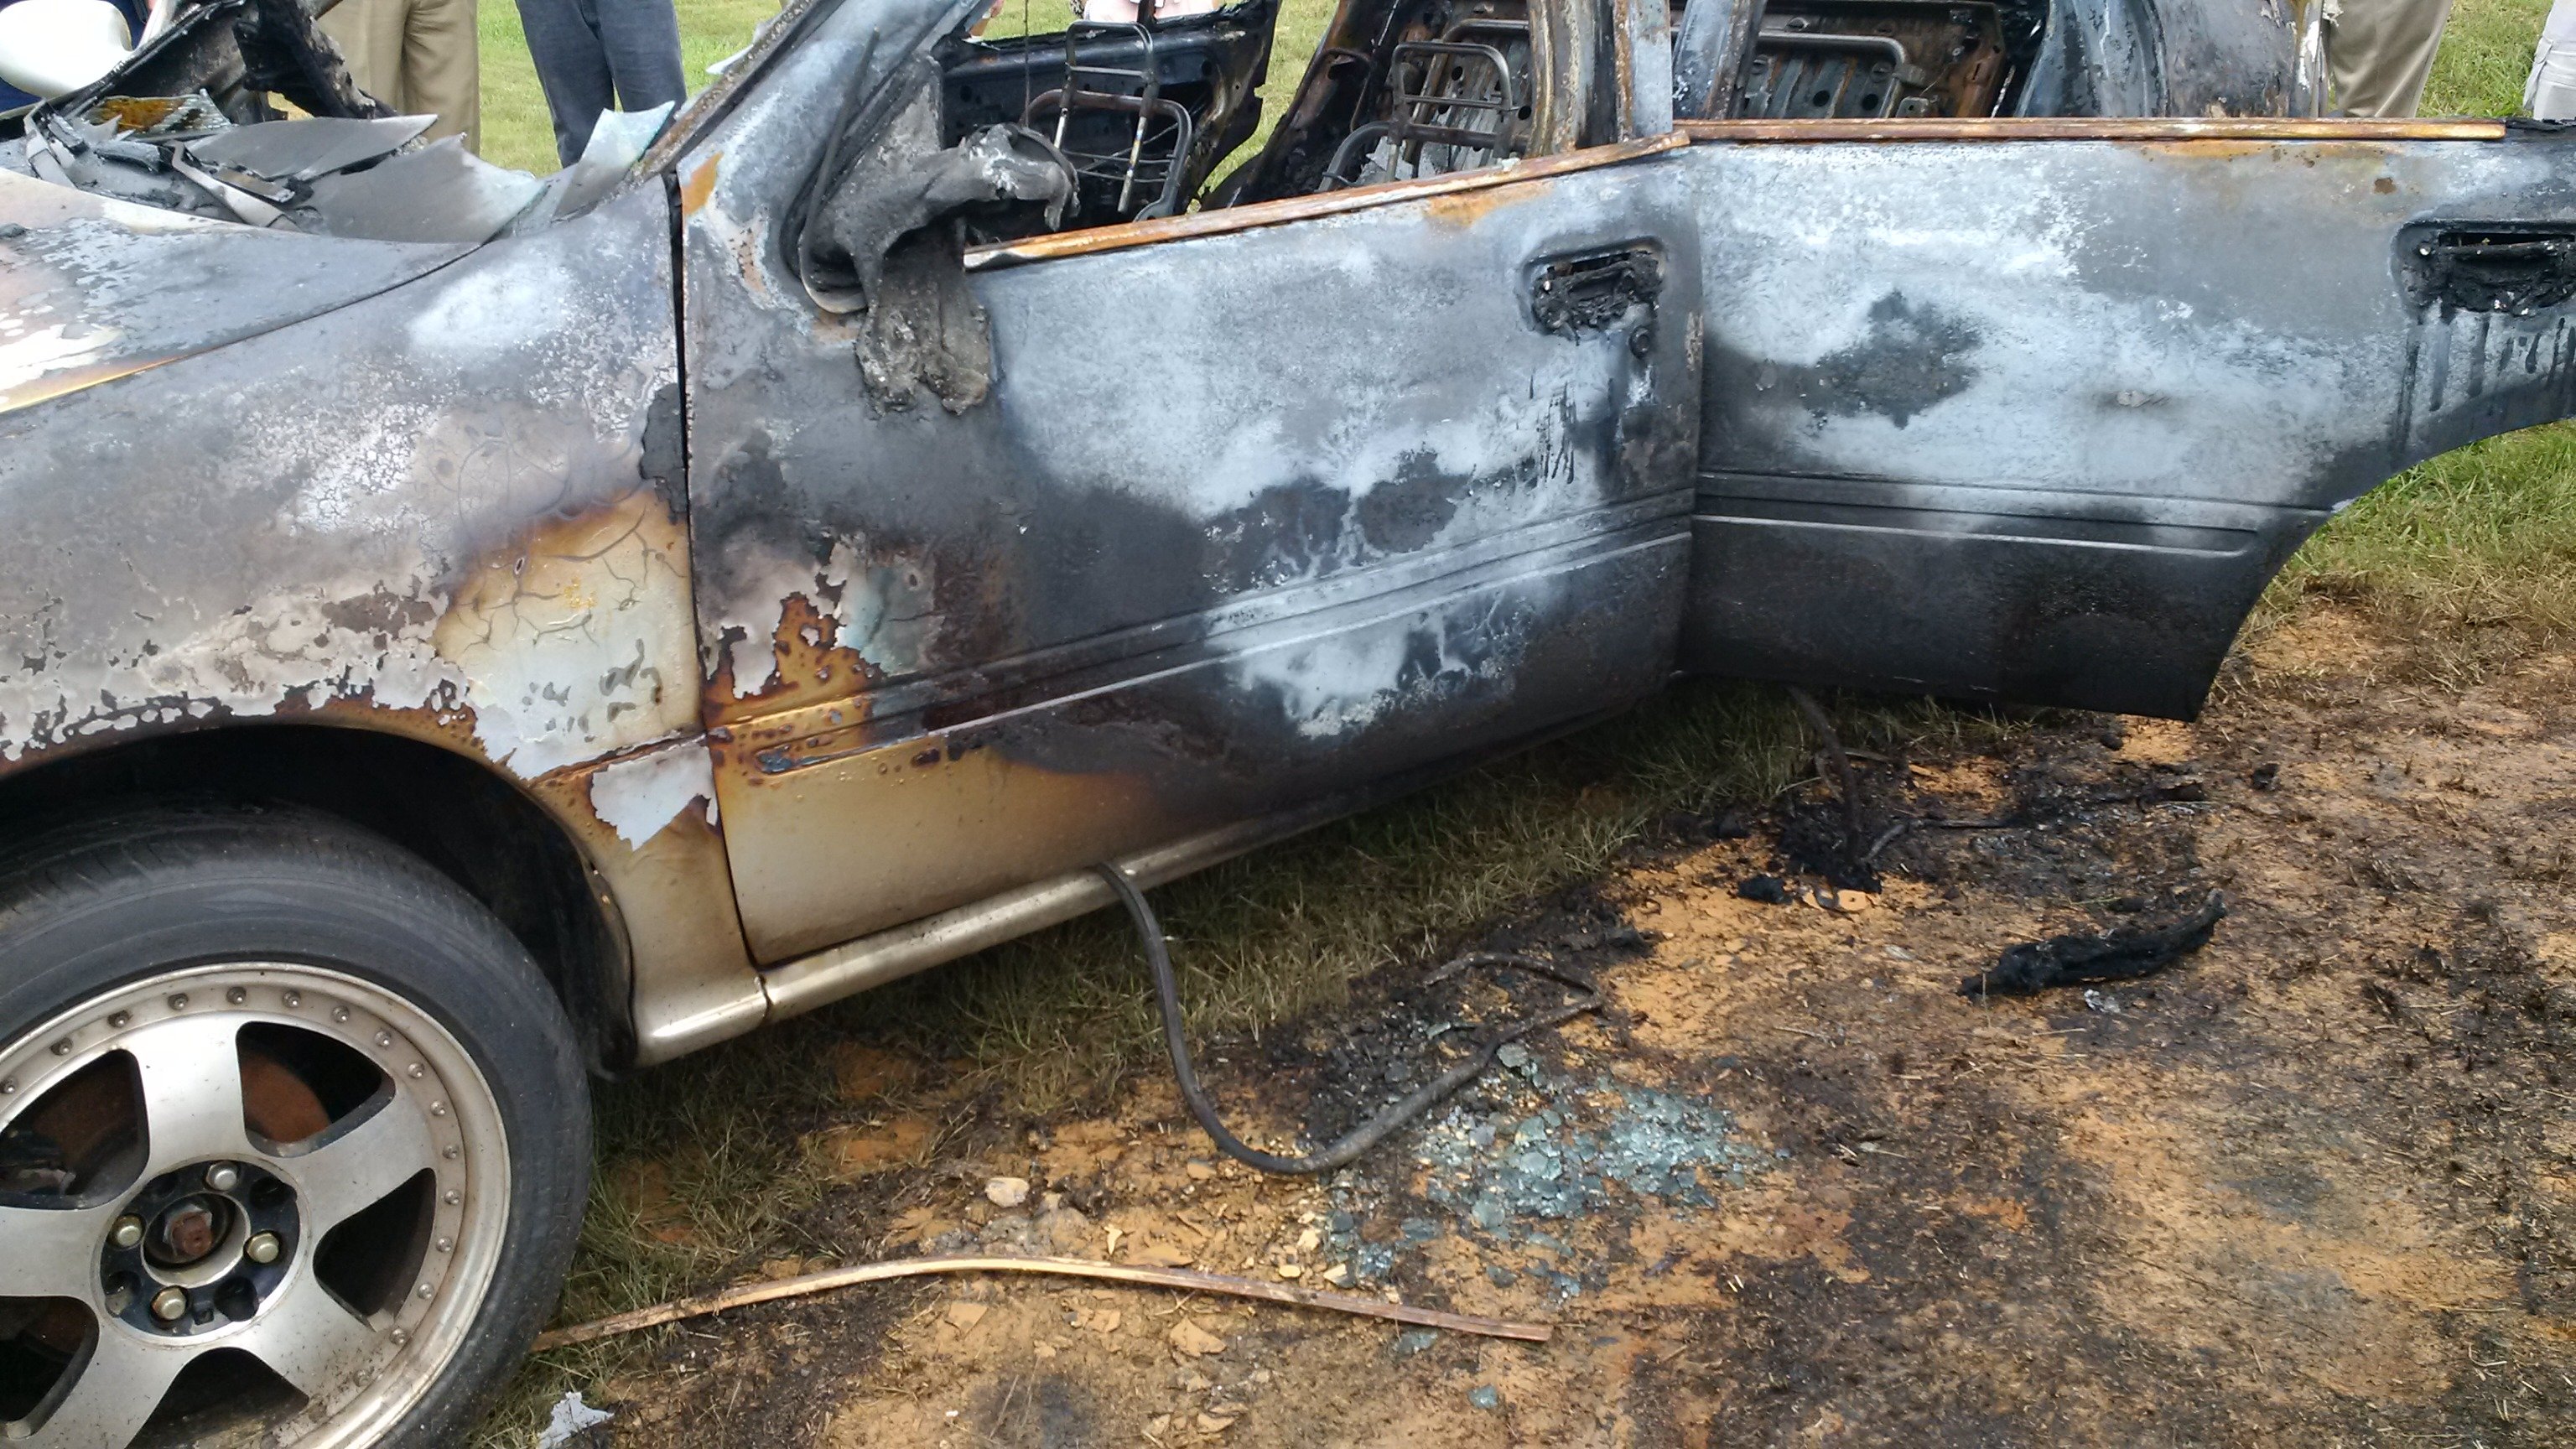 Burned car and evidence